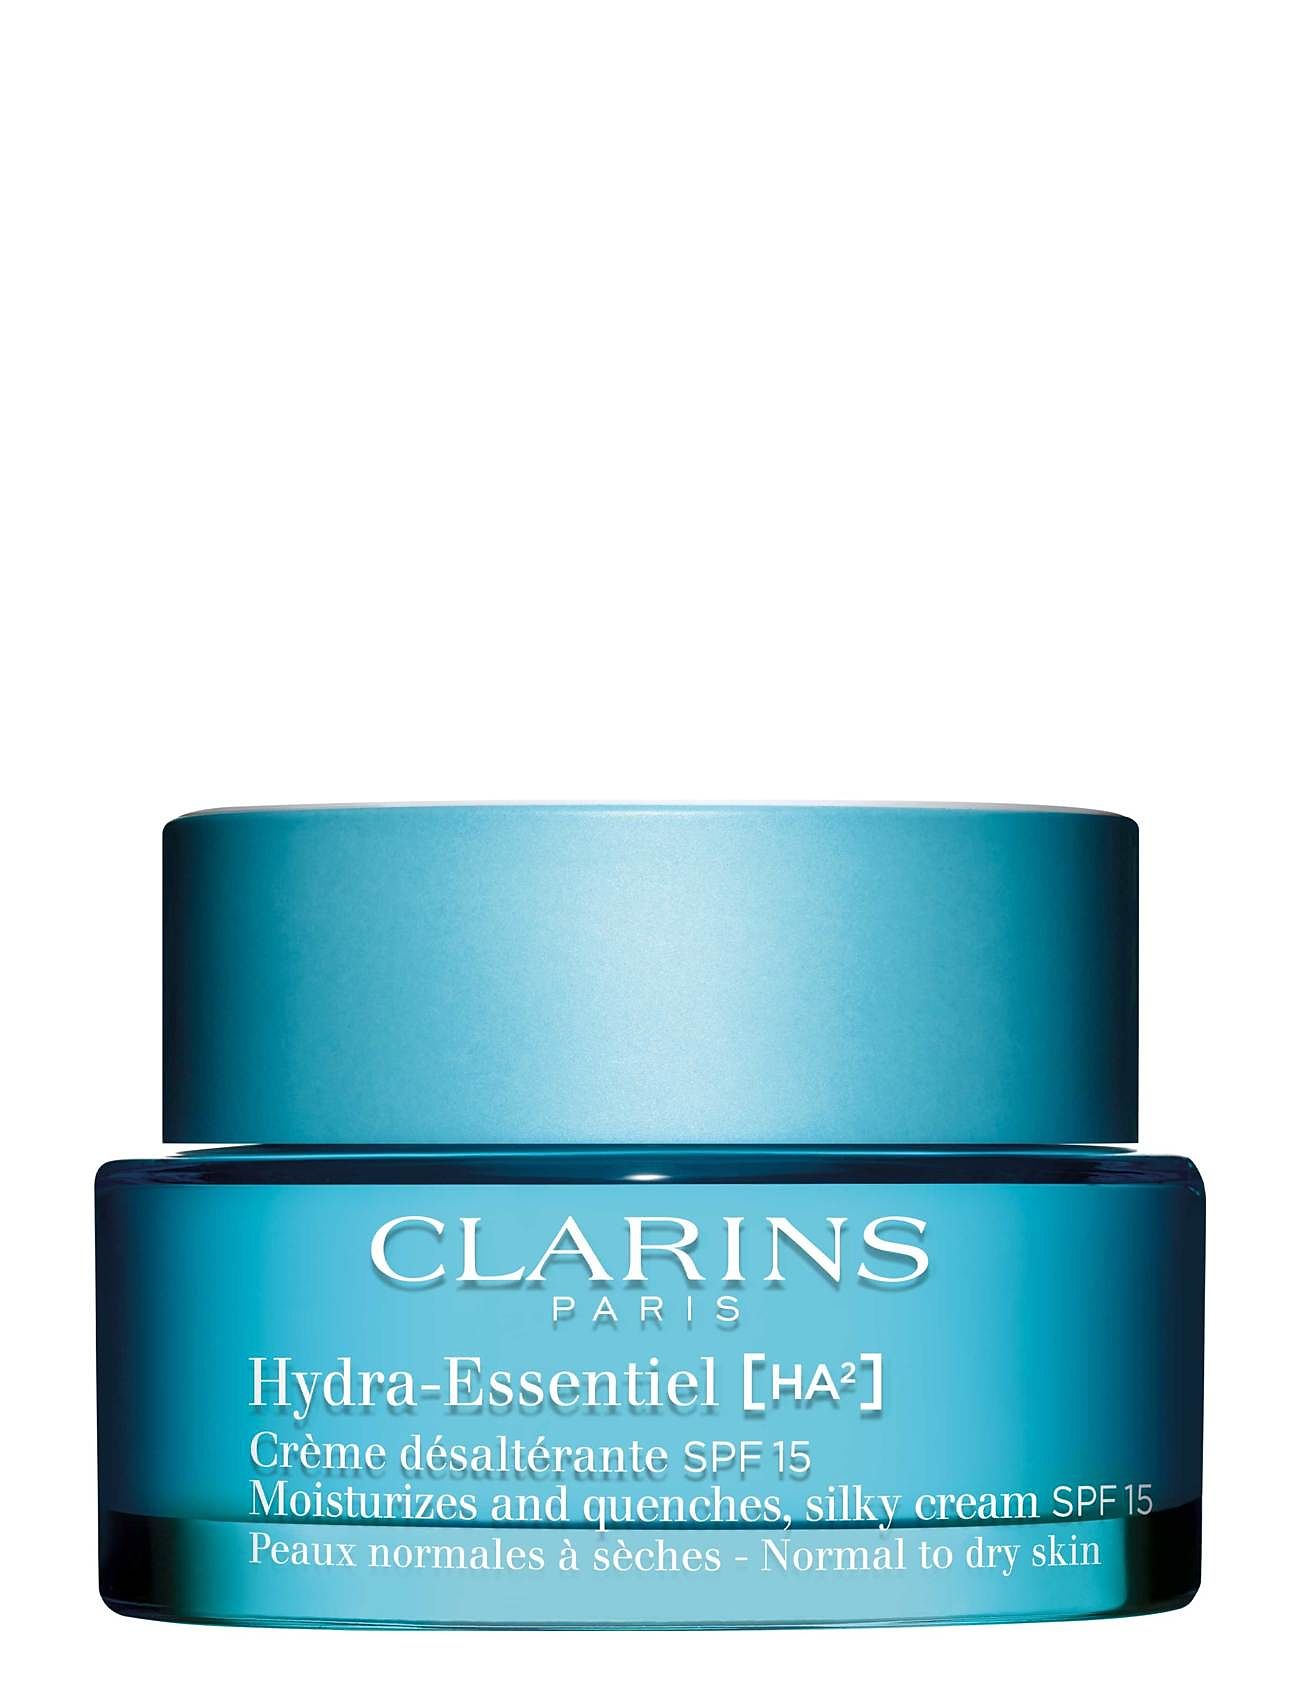 Hydra-Essentiel Spf 15 Moisturizes And Quenches, Silky Cream Normal To Dry Skin Fugtighedscreme Dagcreme Nude Clarins